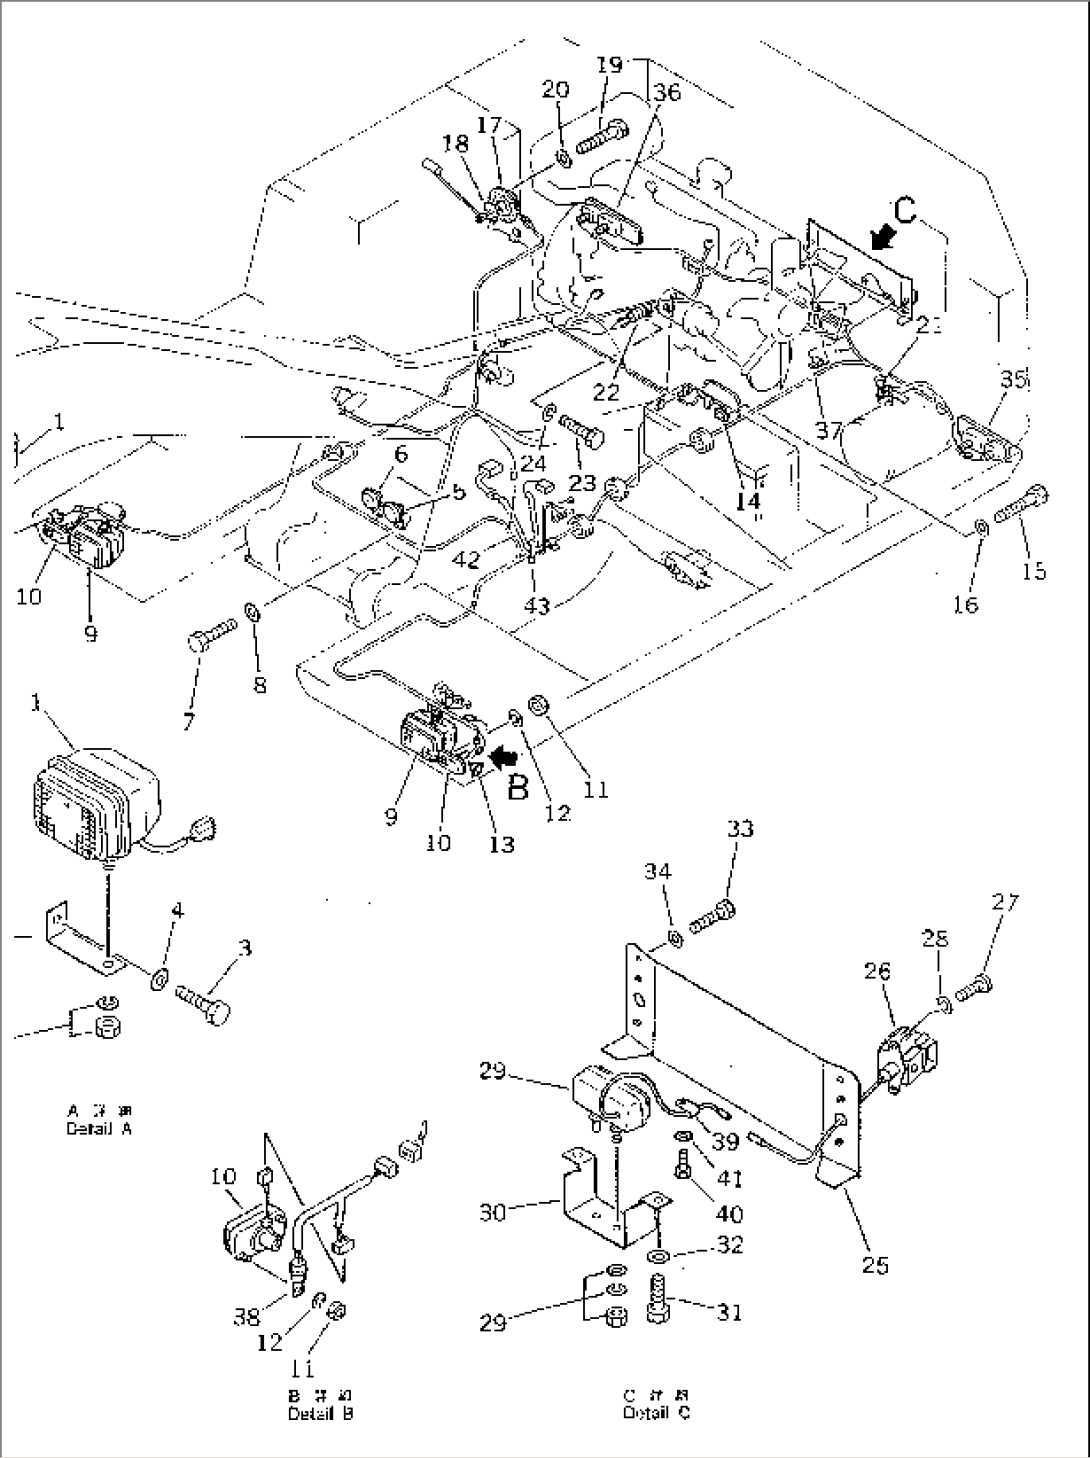 ELECTRICAL SYSTEM (1/2)(#1601-1861)